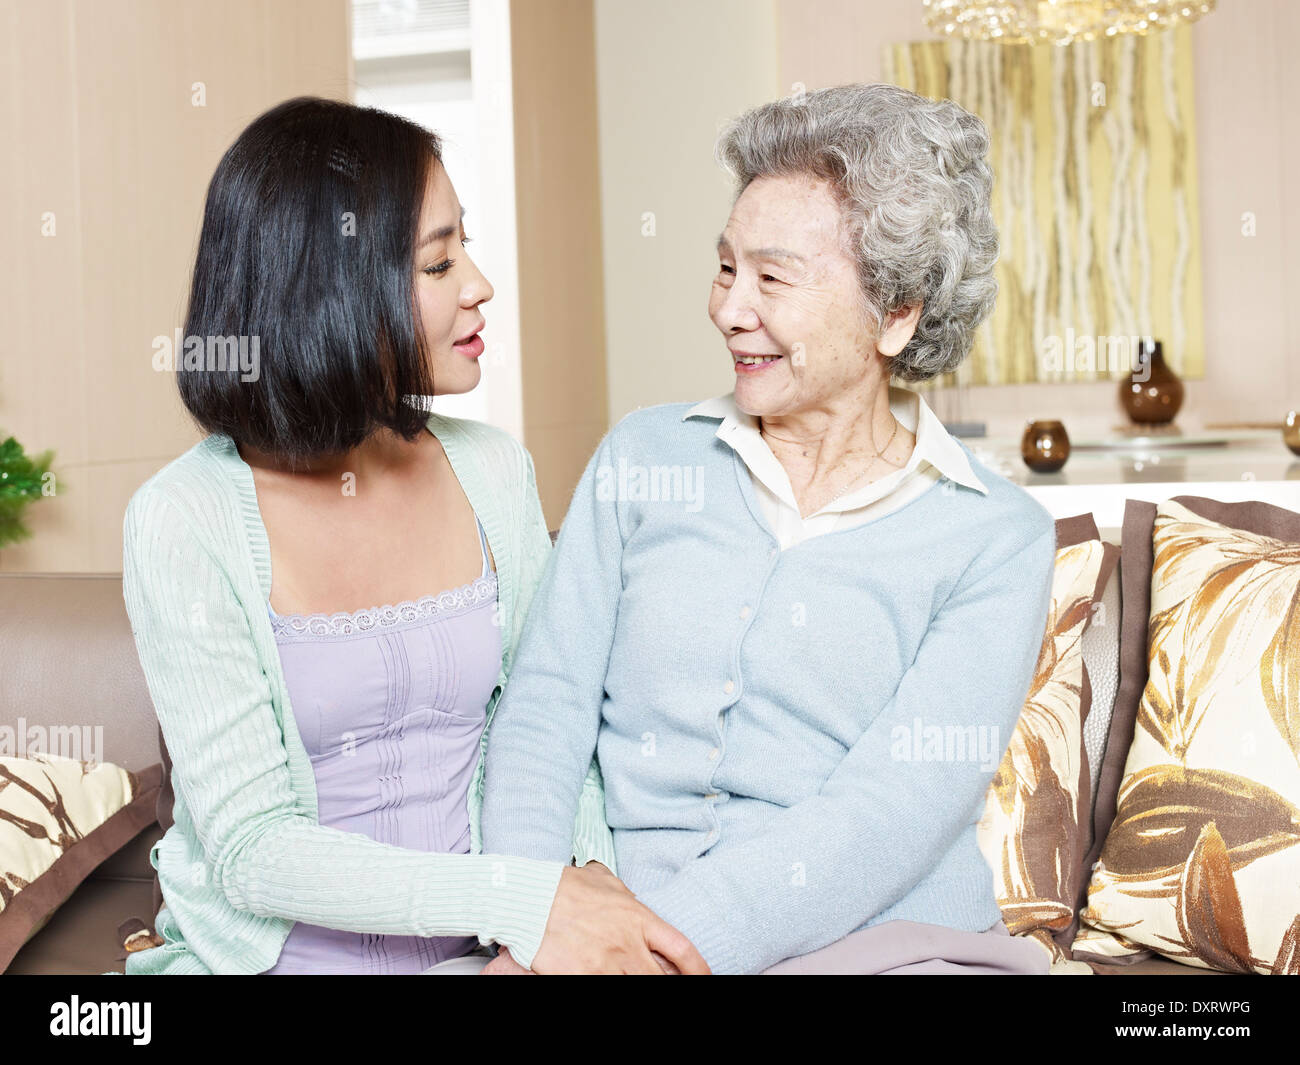 mother and daughter Stock Photo